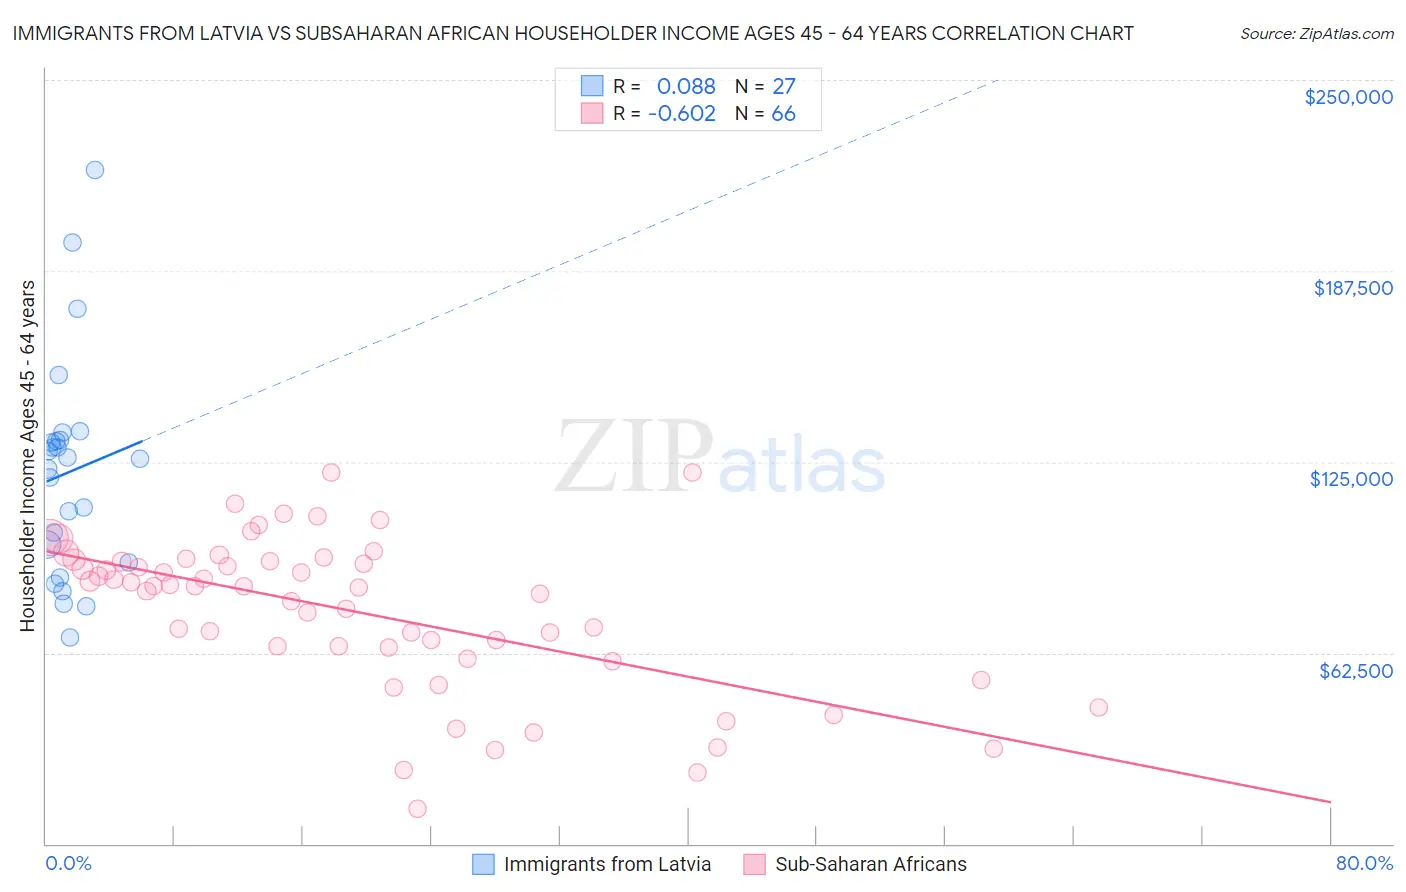 Immigrants from Latvia vs Subsaharan African Householder Income Ages 45 - 64 years